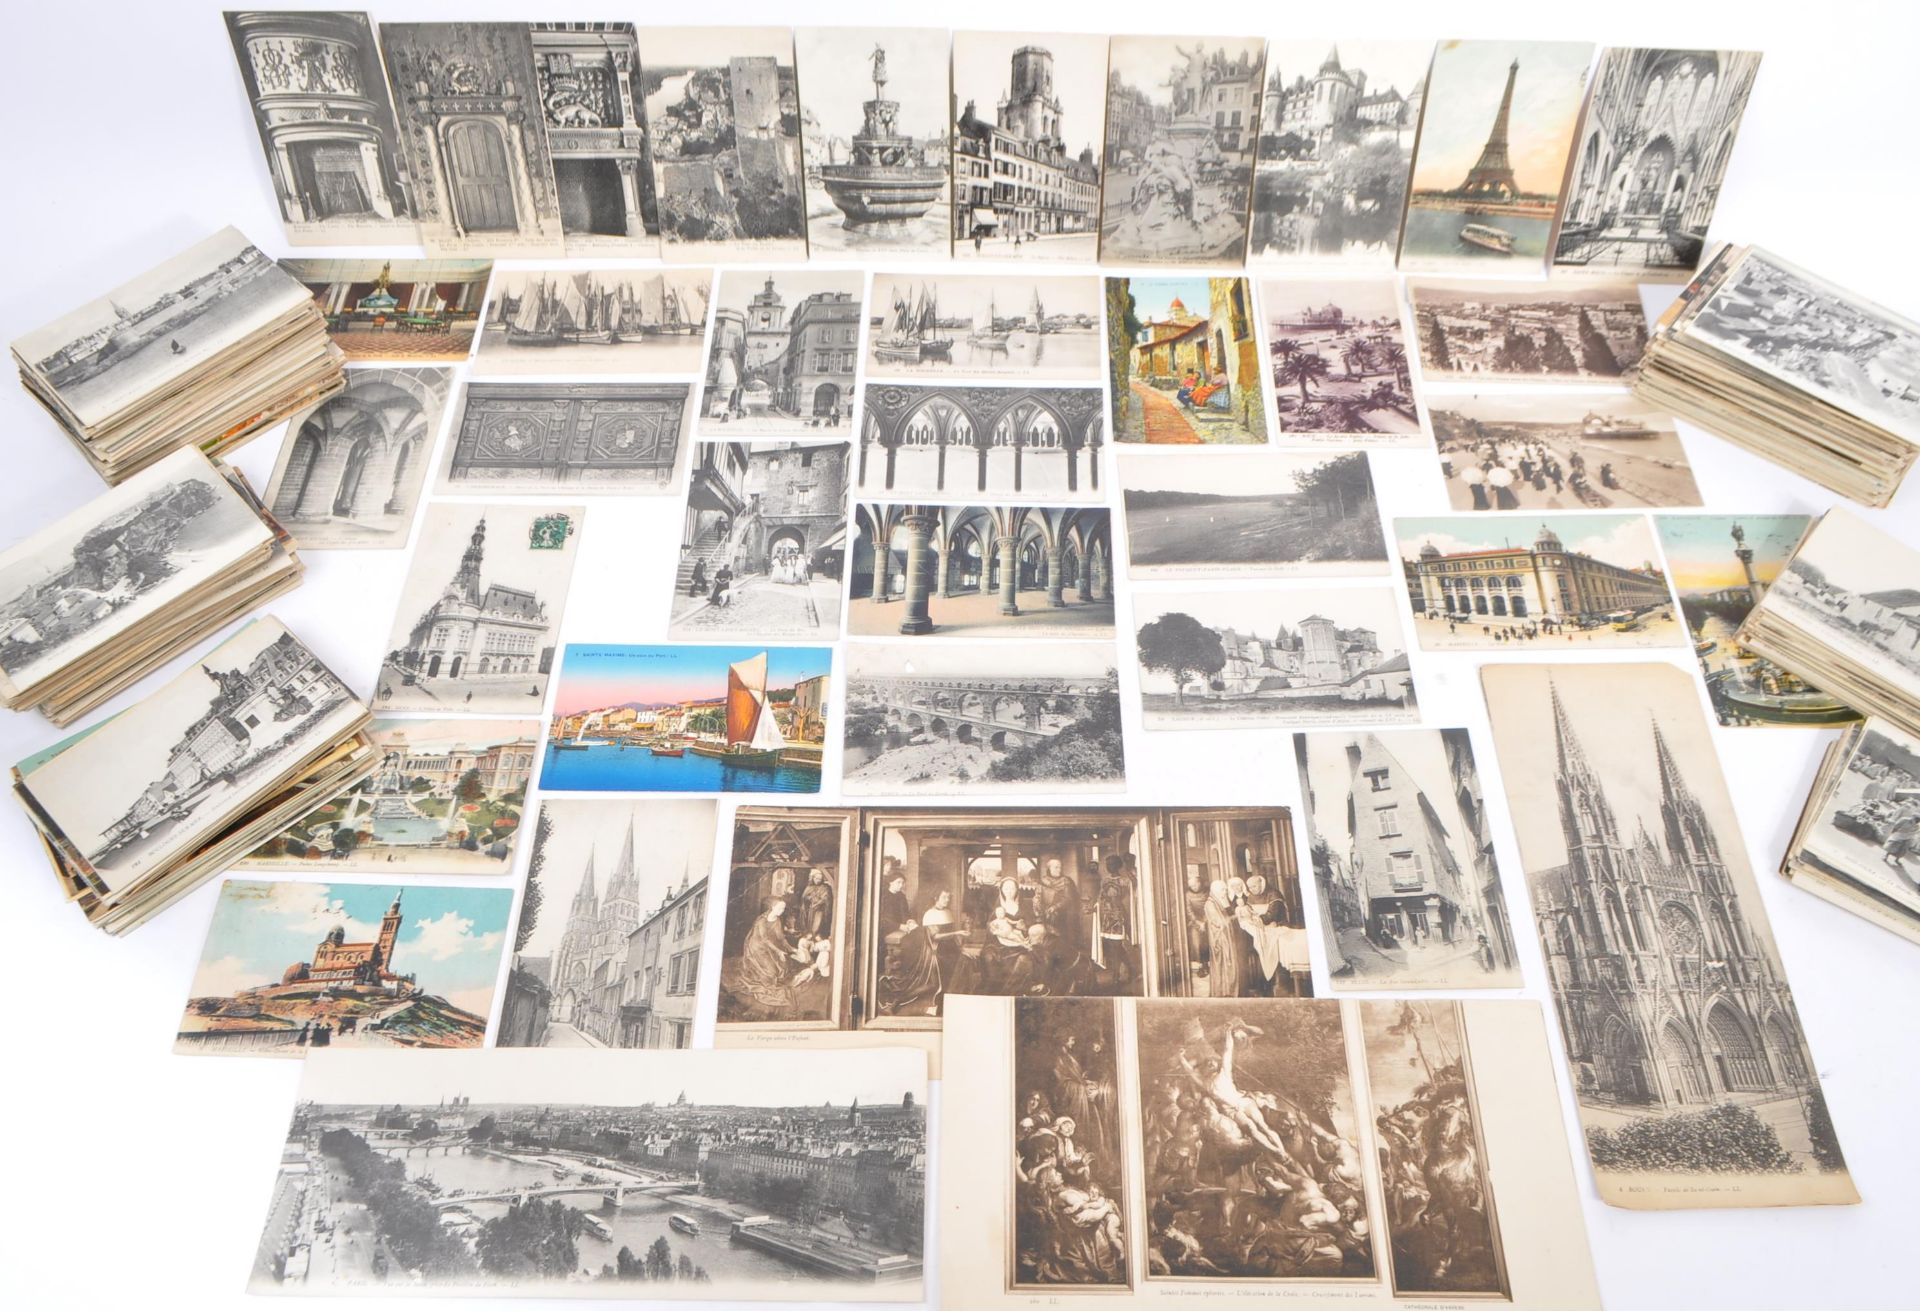 LL - Pre 1930s Postcards published by Leon and Levy also known as Louis Levy.